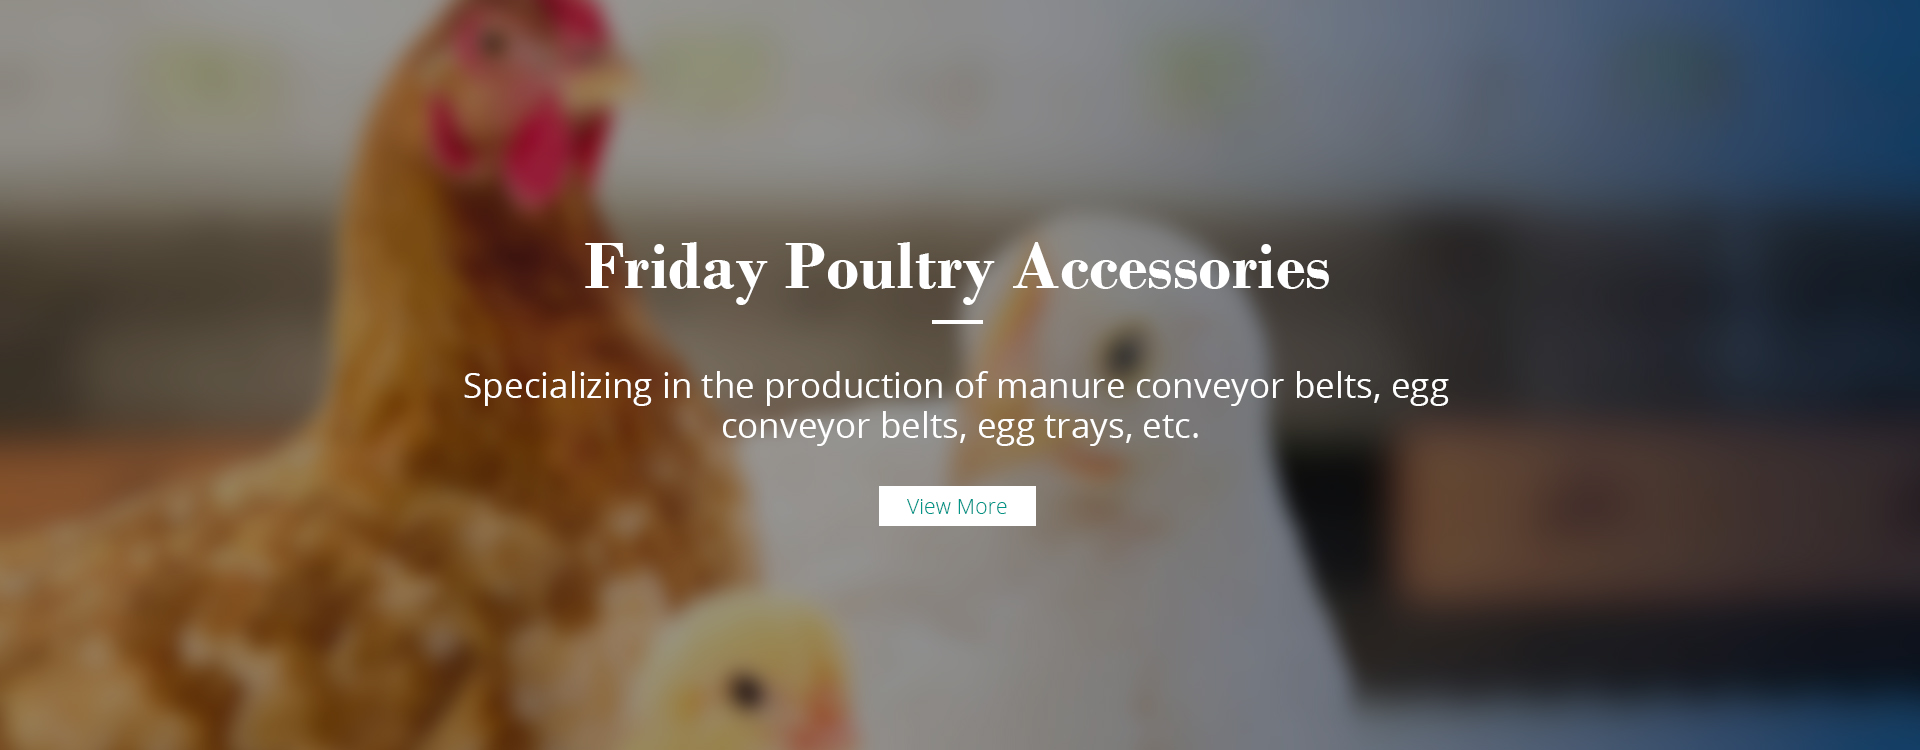 Friday Poultry Accessories